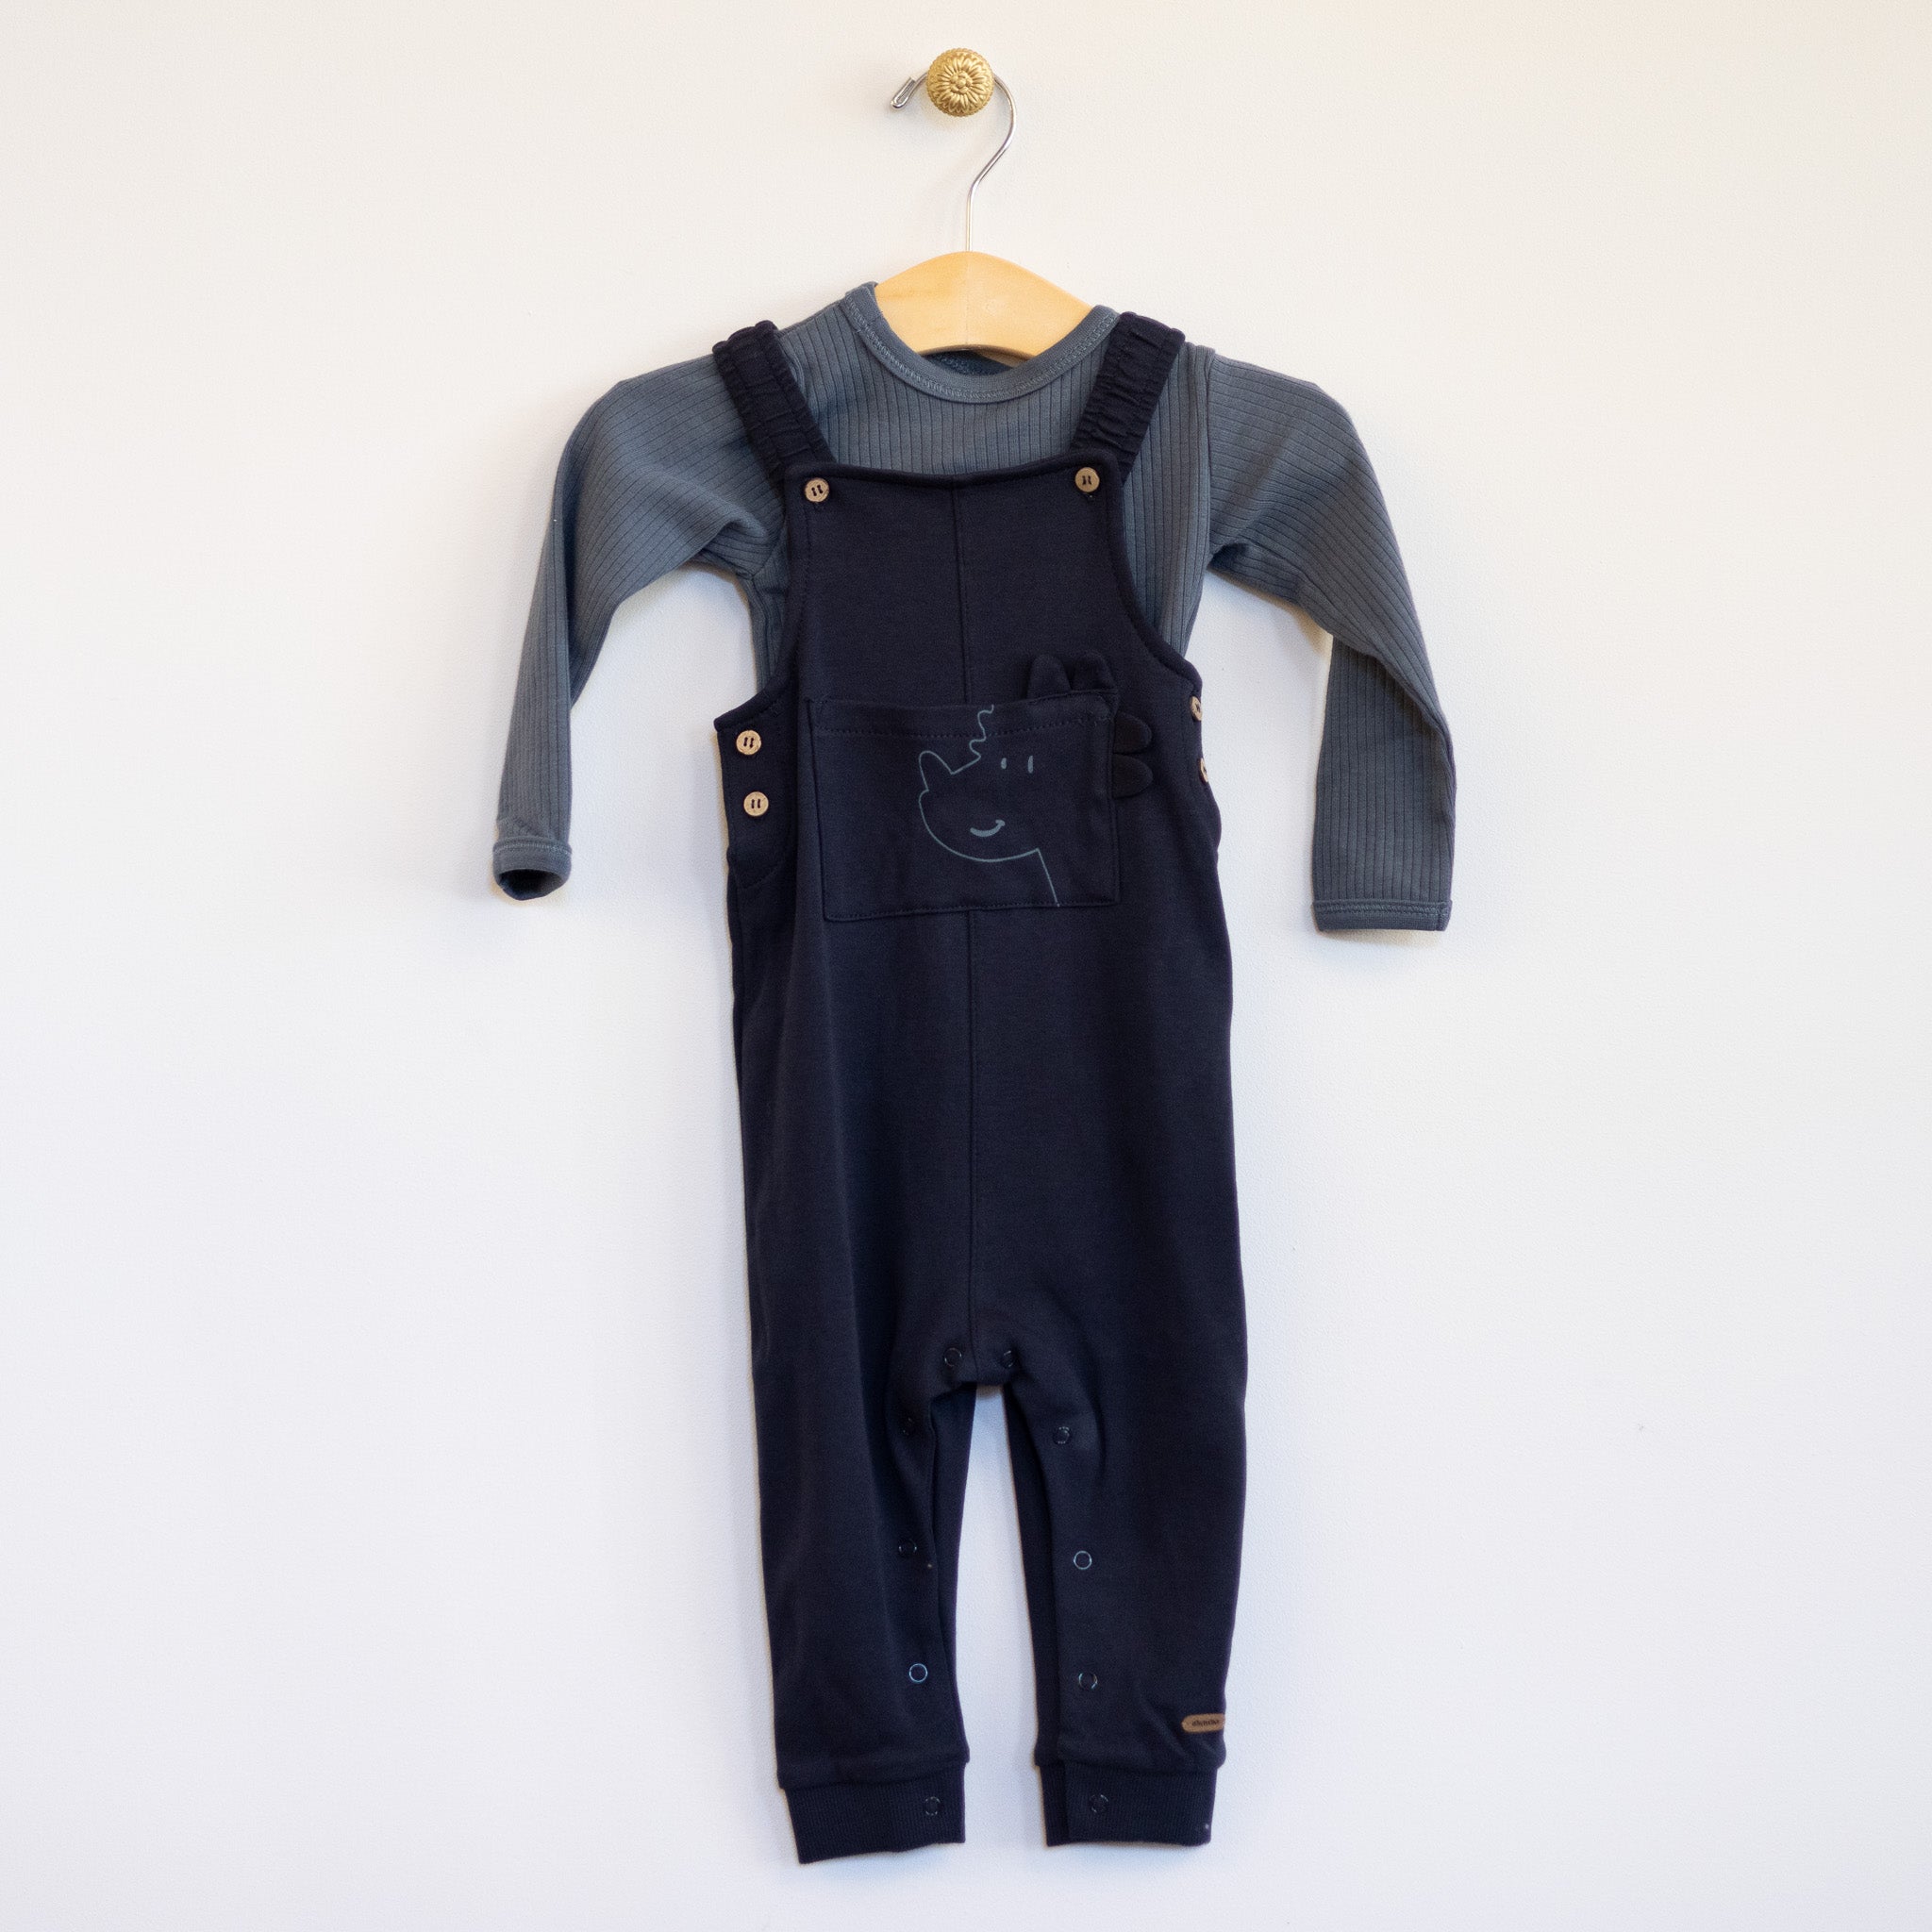 Navy Knit Dino Overall and Tee